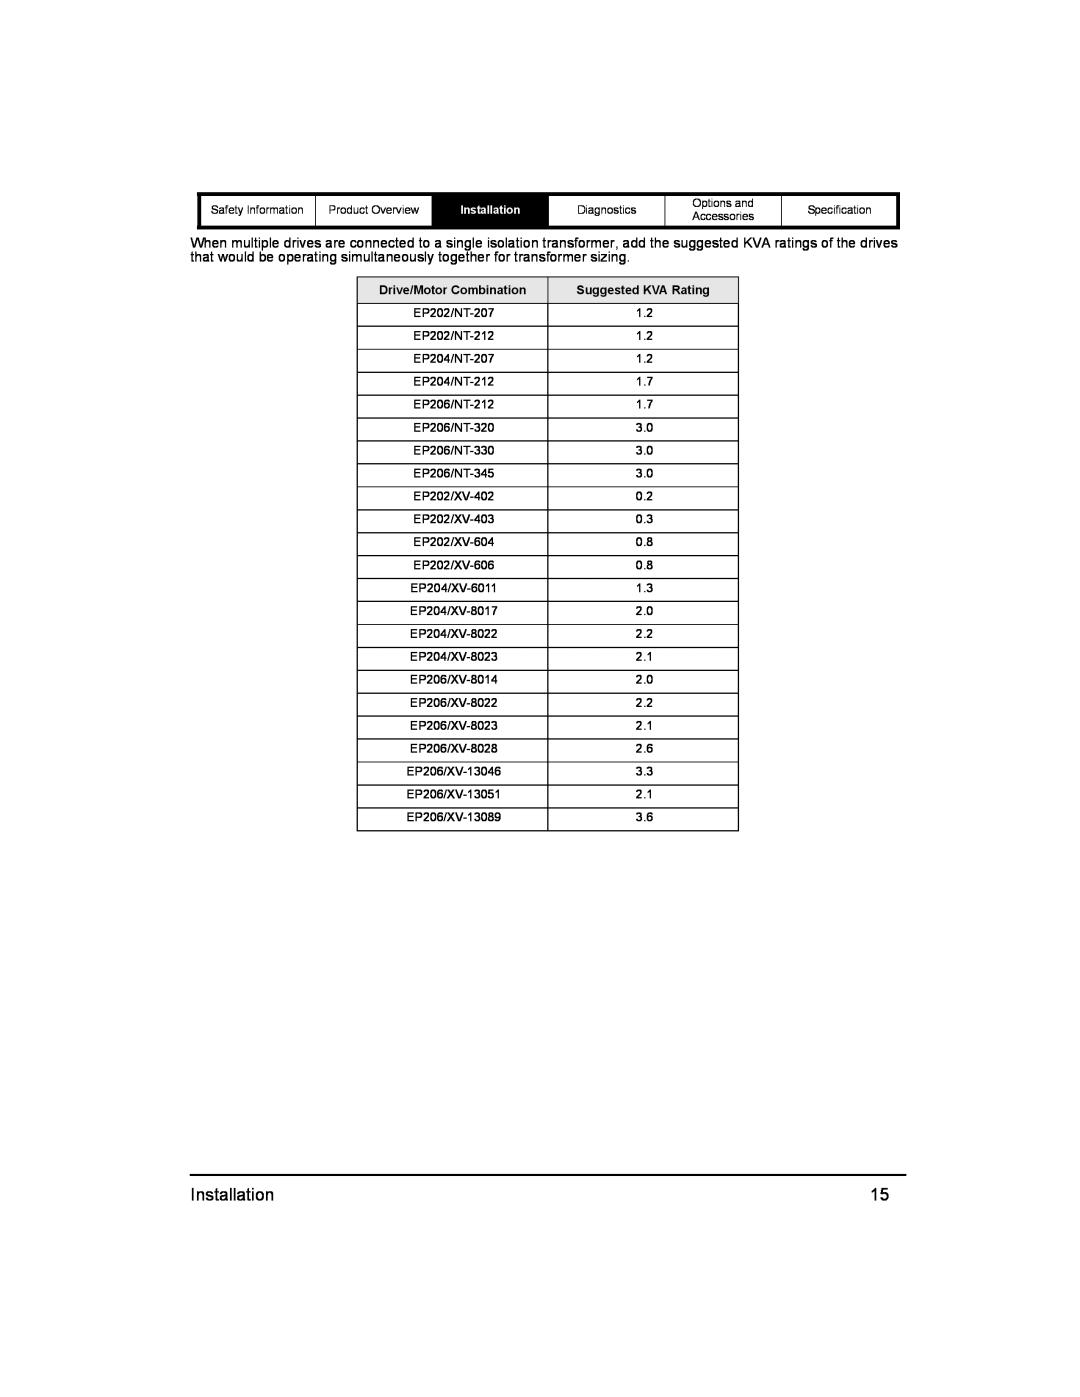 Emerson 400518-01 installation manual Installation, Drive/Motor Combination, Suggested KVA Rating 